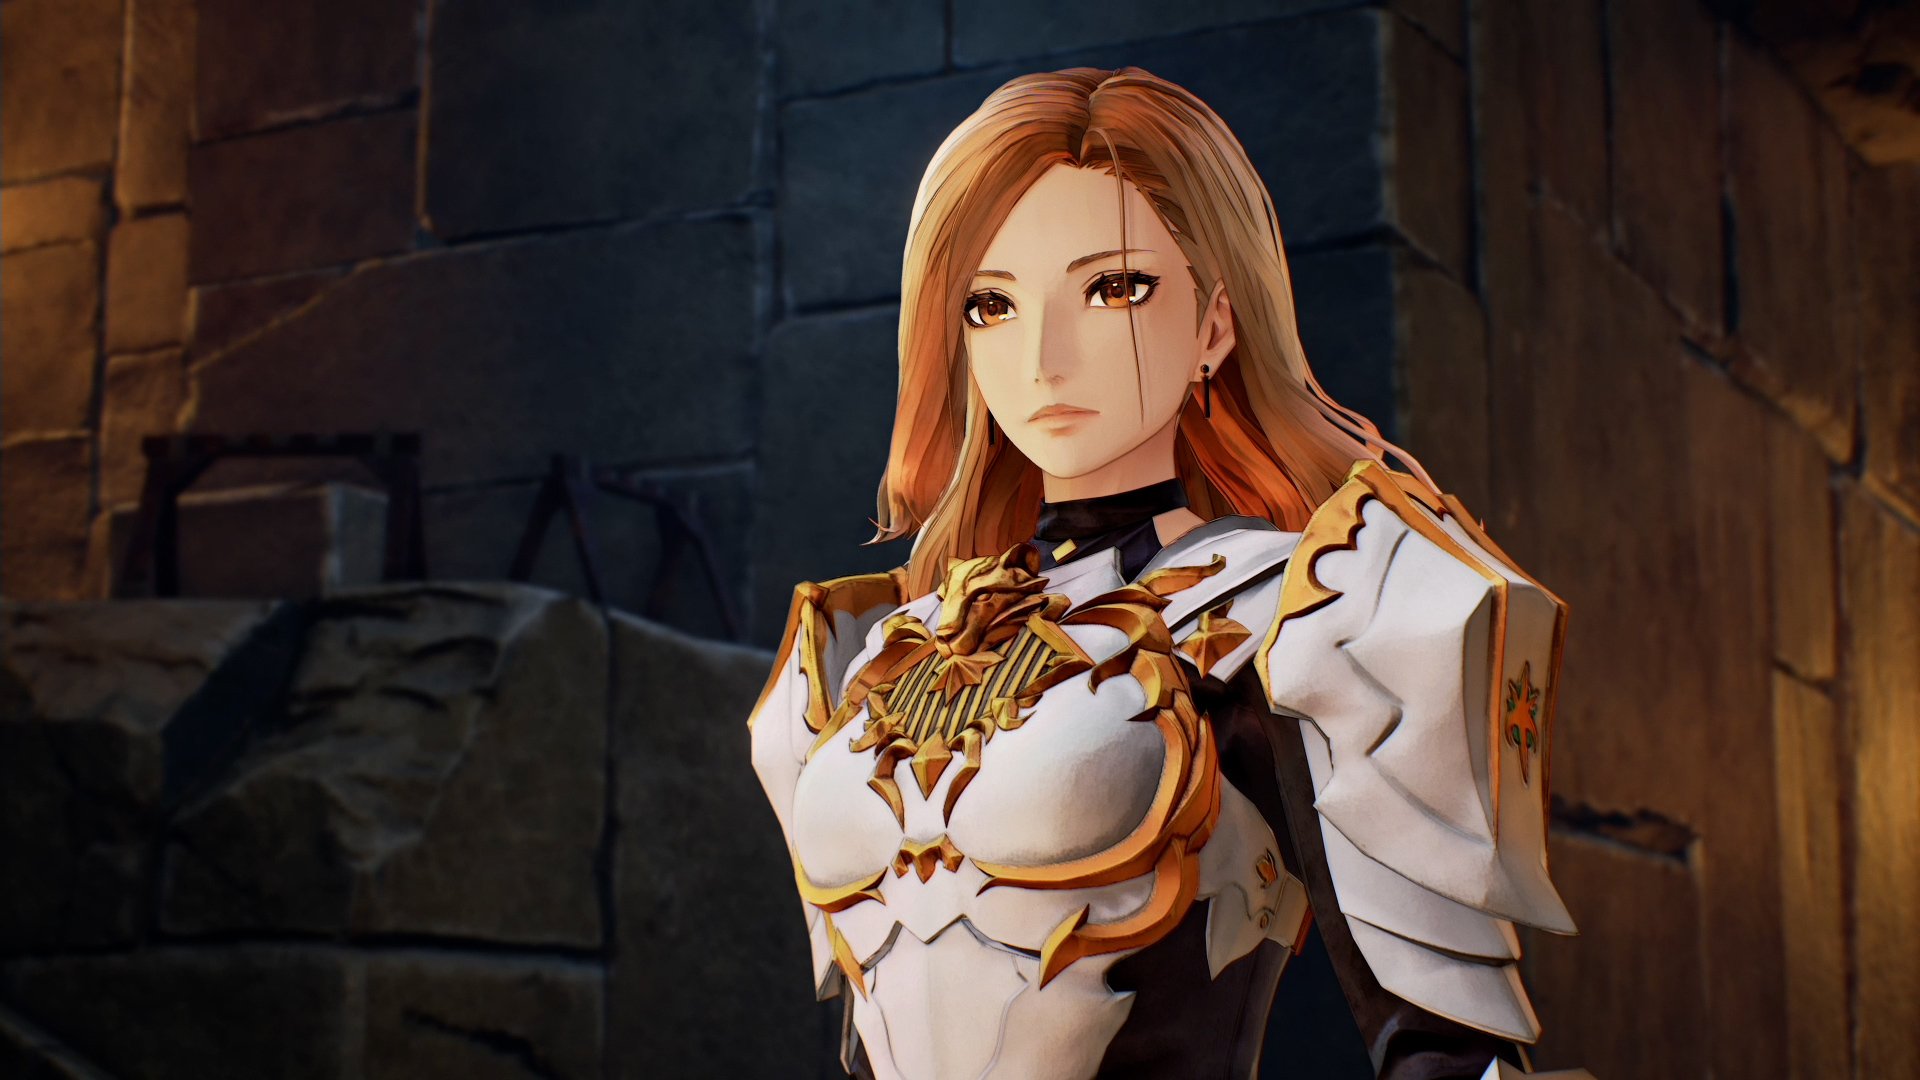 Tales of Arise Gets Tons of New Screenshots Showing